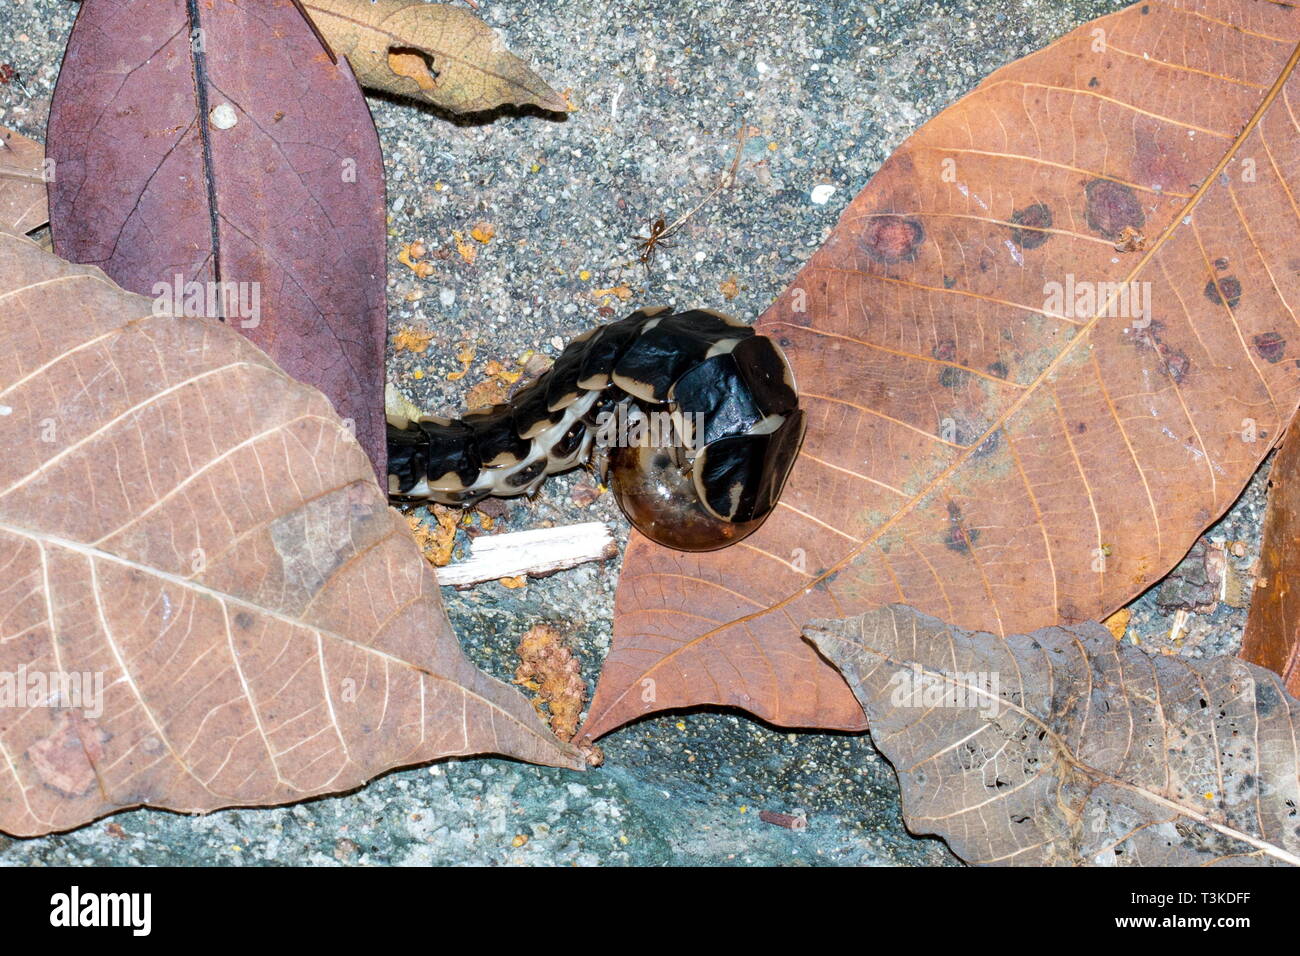 A larva of the world’s largest firefly from the Lamprigera genus feeding on a snail in the forest floor Stock Photo